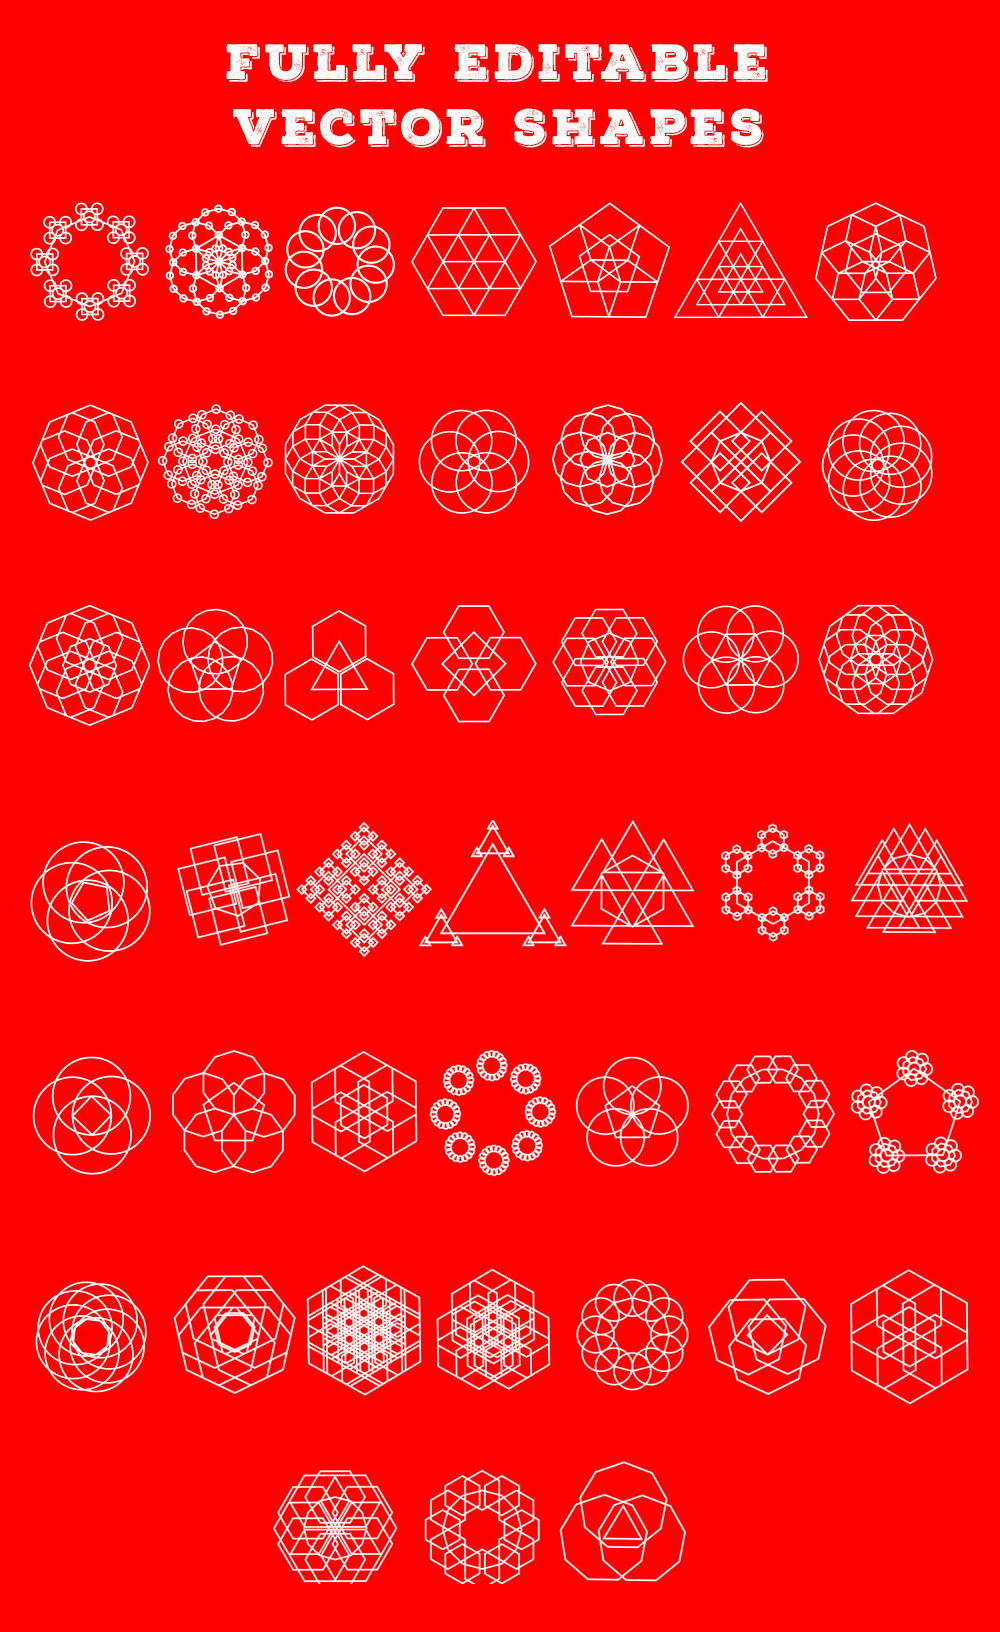 http://www.graphicsfuel.com/wp-content/uploads/2015/04/Free-Geometric-Outline-Shapes.jpg